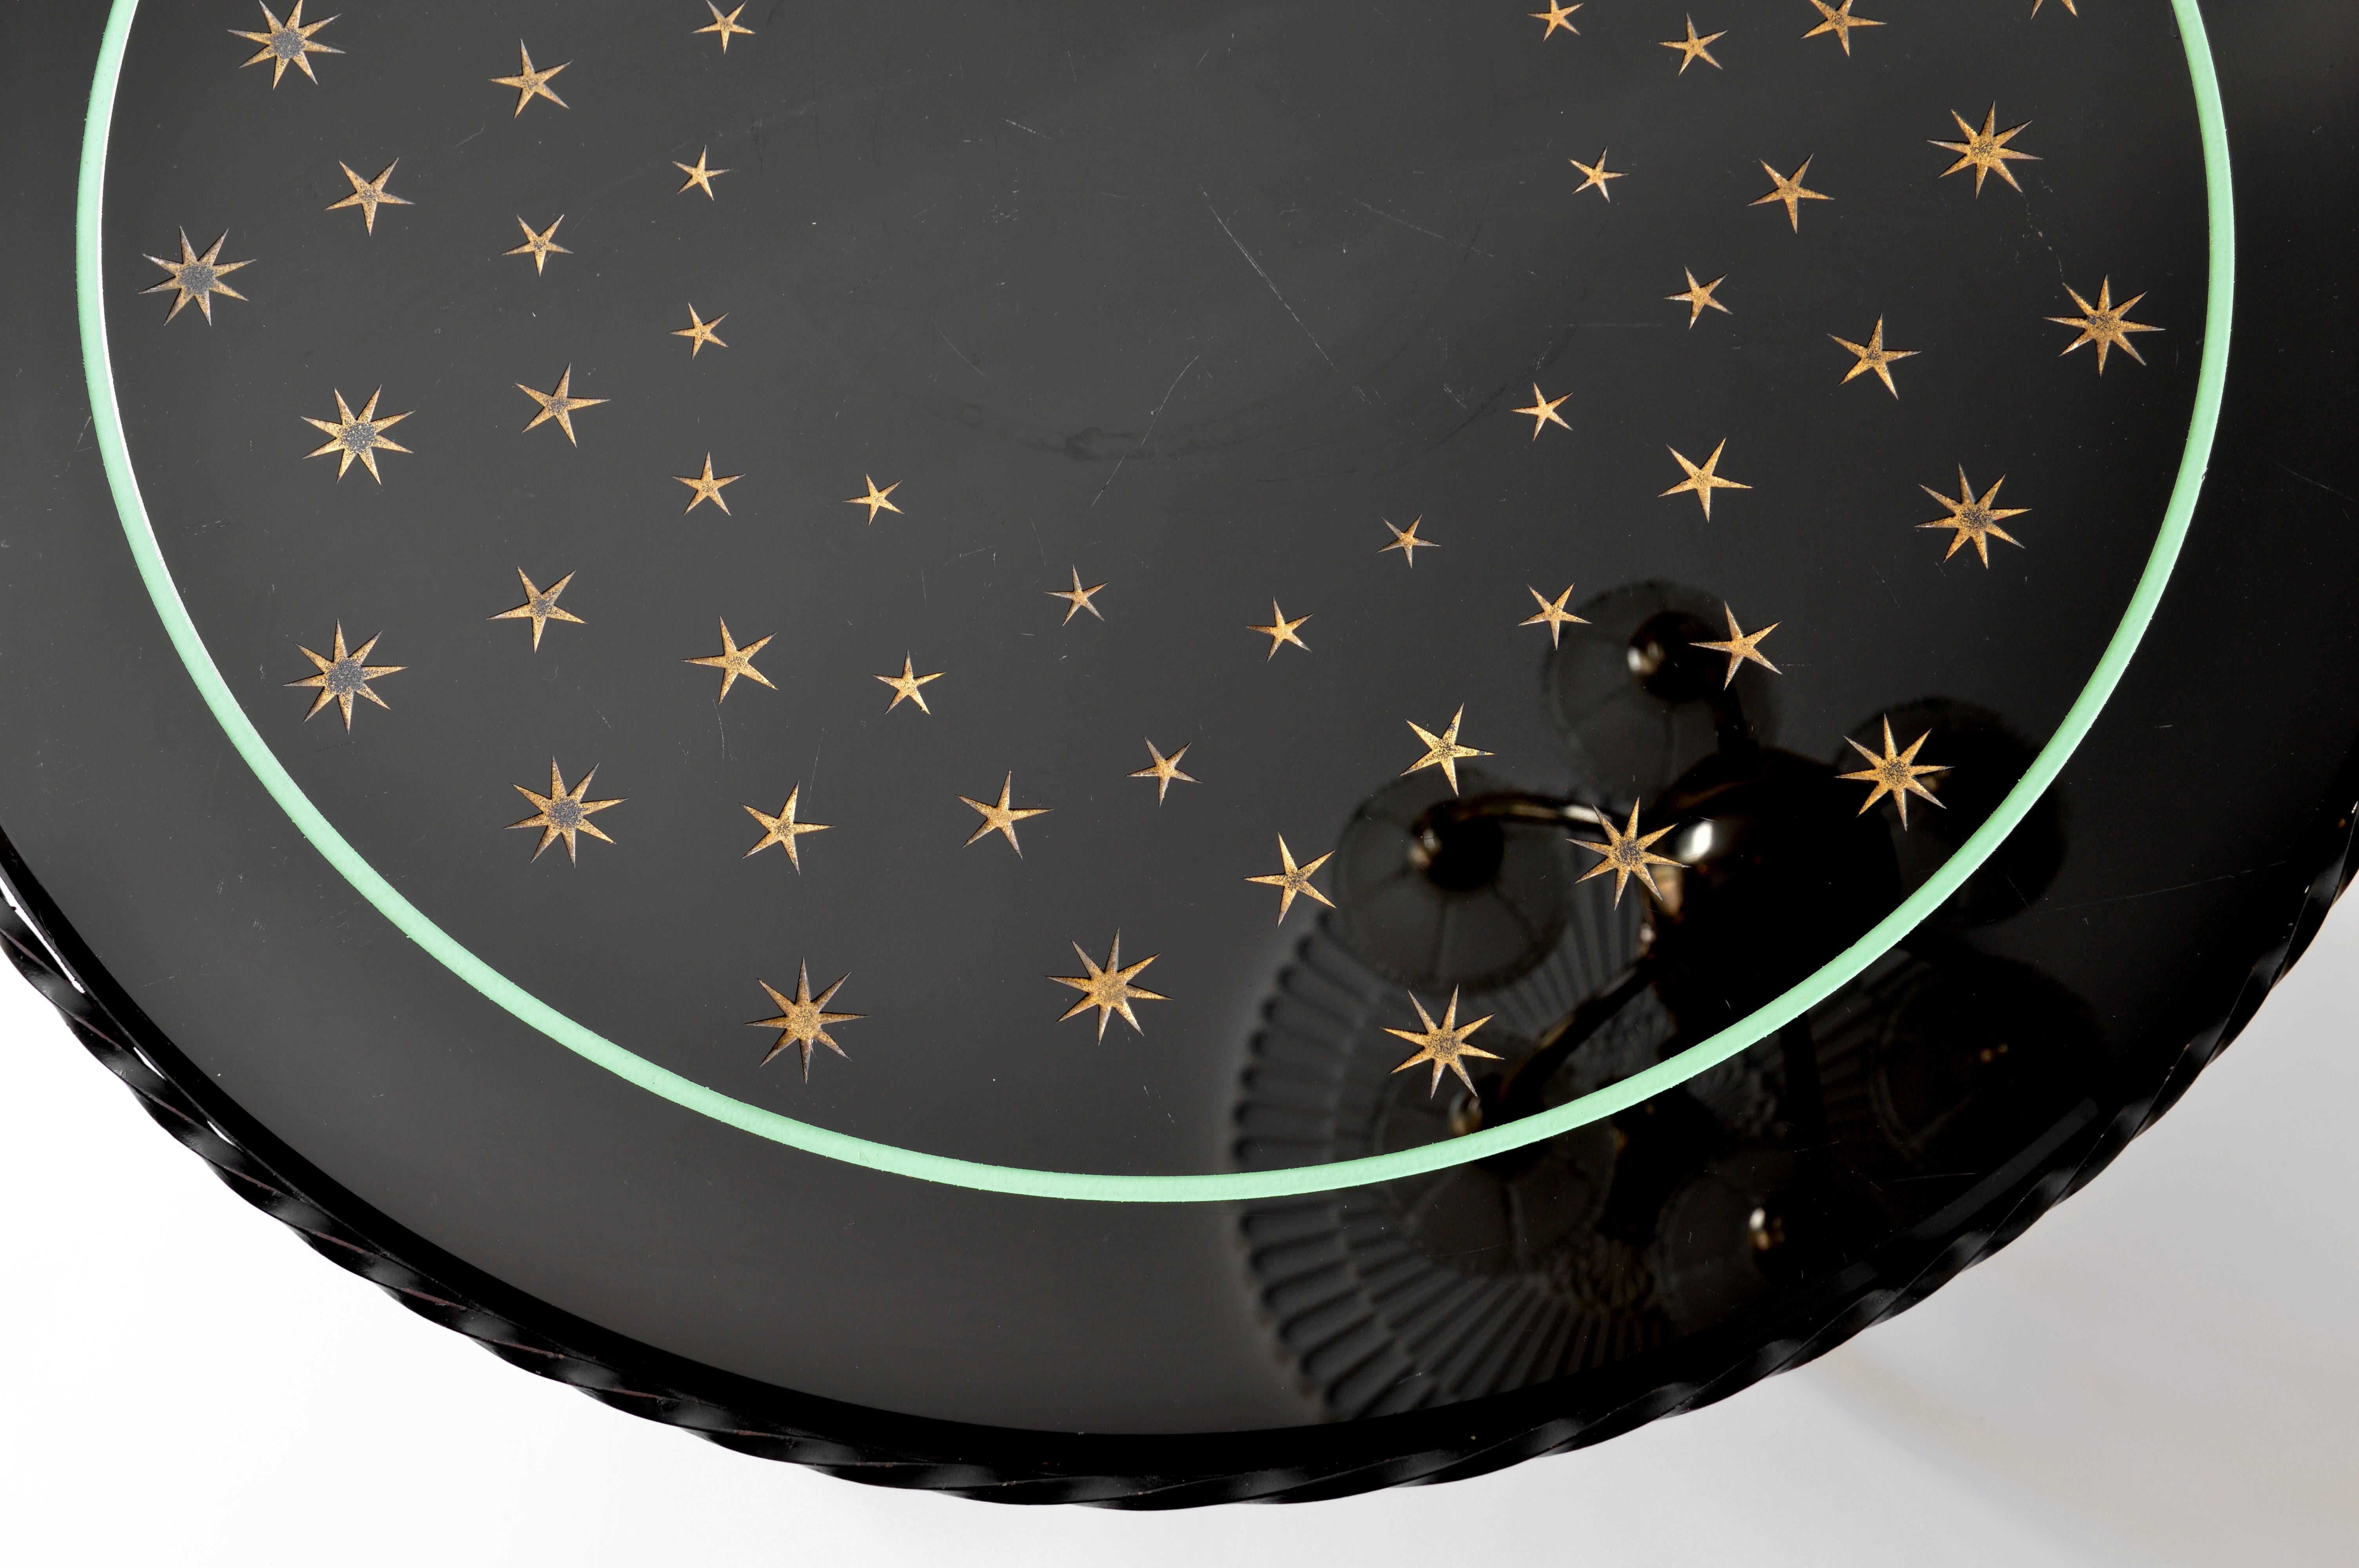 French Art Deco Wrought-Iron & Etched Glass Milky Way Coffee Table, Late 1930s For Sale 3